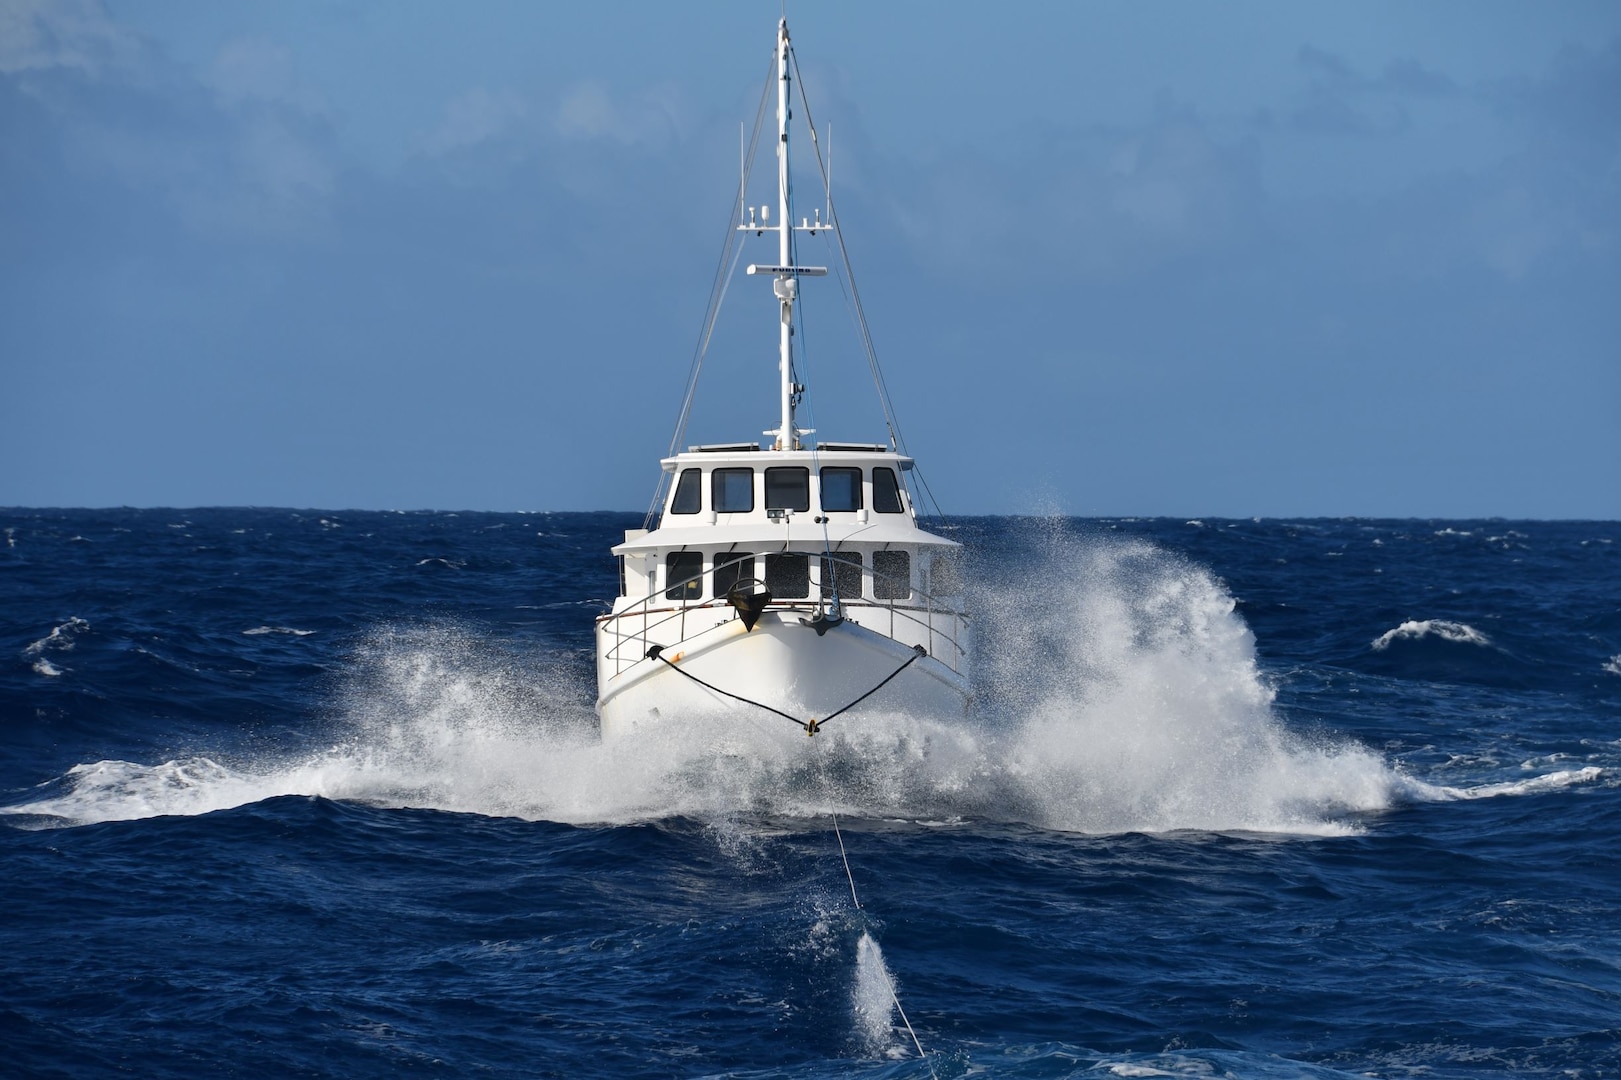 On February 13th, 2023 U.S. Coast Guard Cutter Oliver Berry, a 154-foot Fast Response Cutter was tasked with assisting the vessel Eden Bound, a 58-foot long pleasure craft adrift 230 nautical miles Southwest of Oahu.